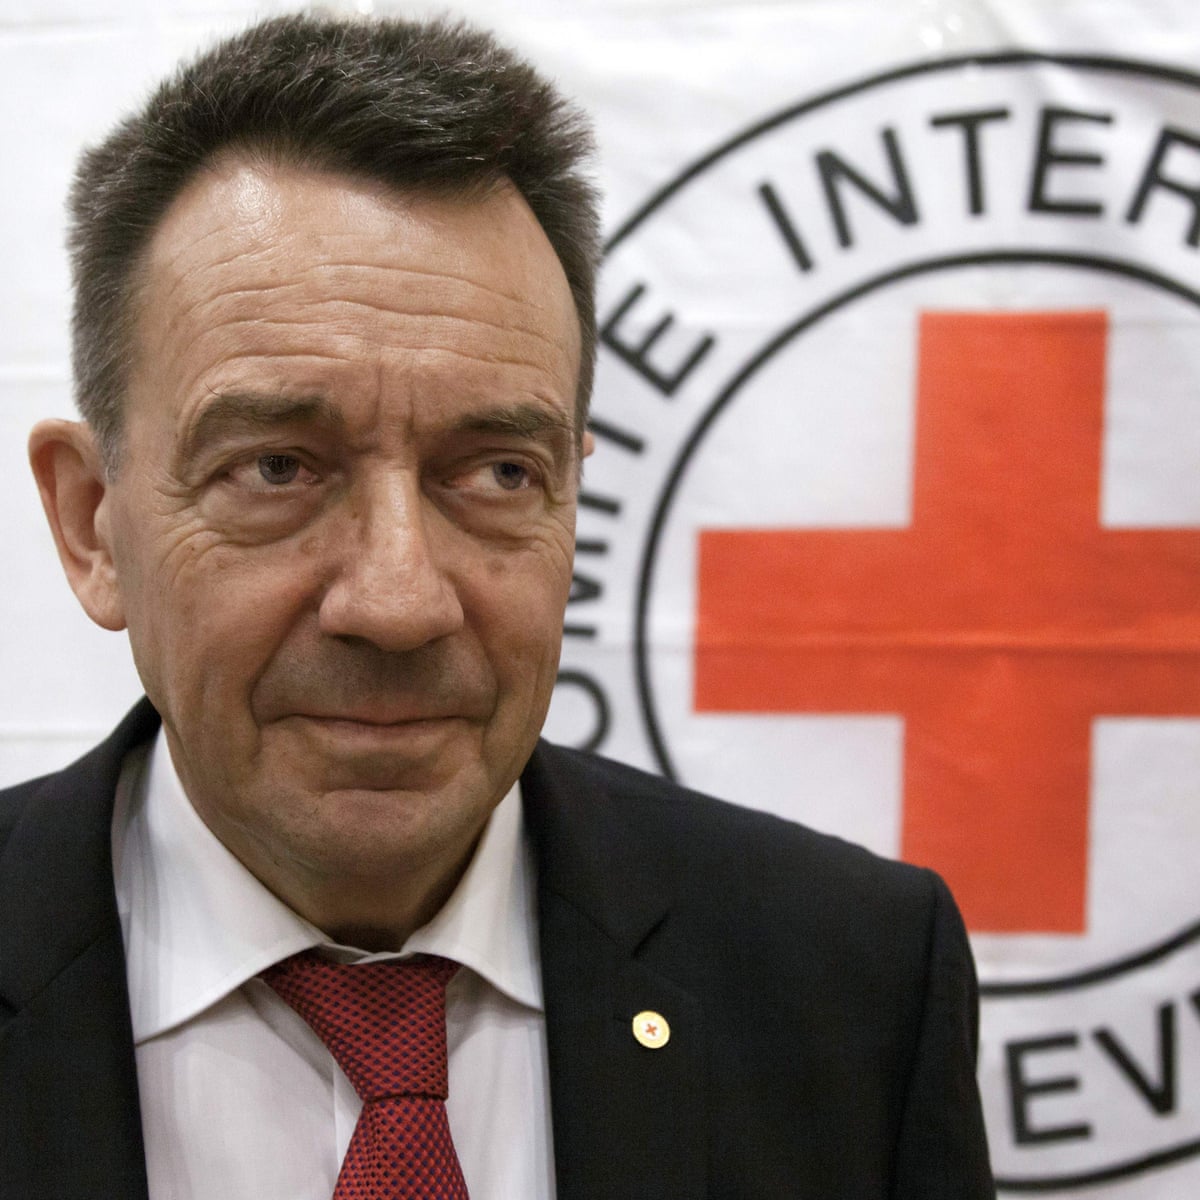 Climate change is exacerbating conflicts, says Red Cross president | International Committee of the Cross (ICRC) | The